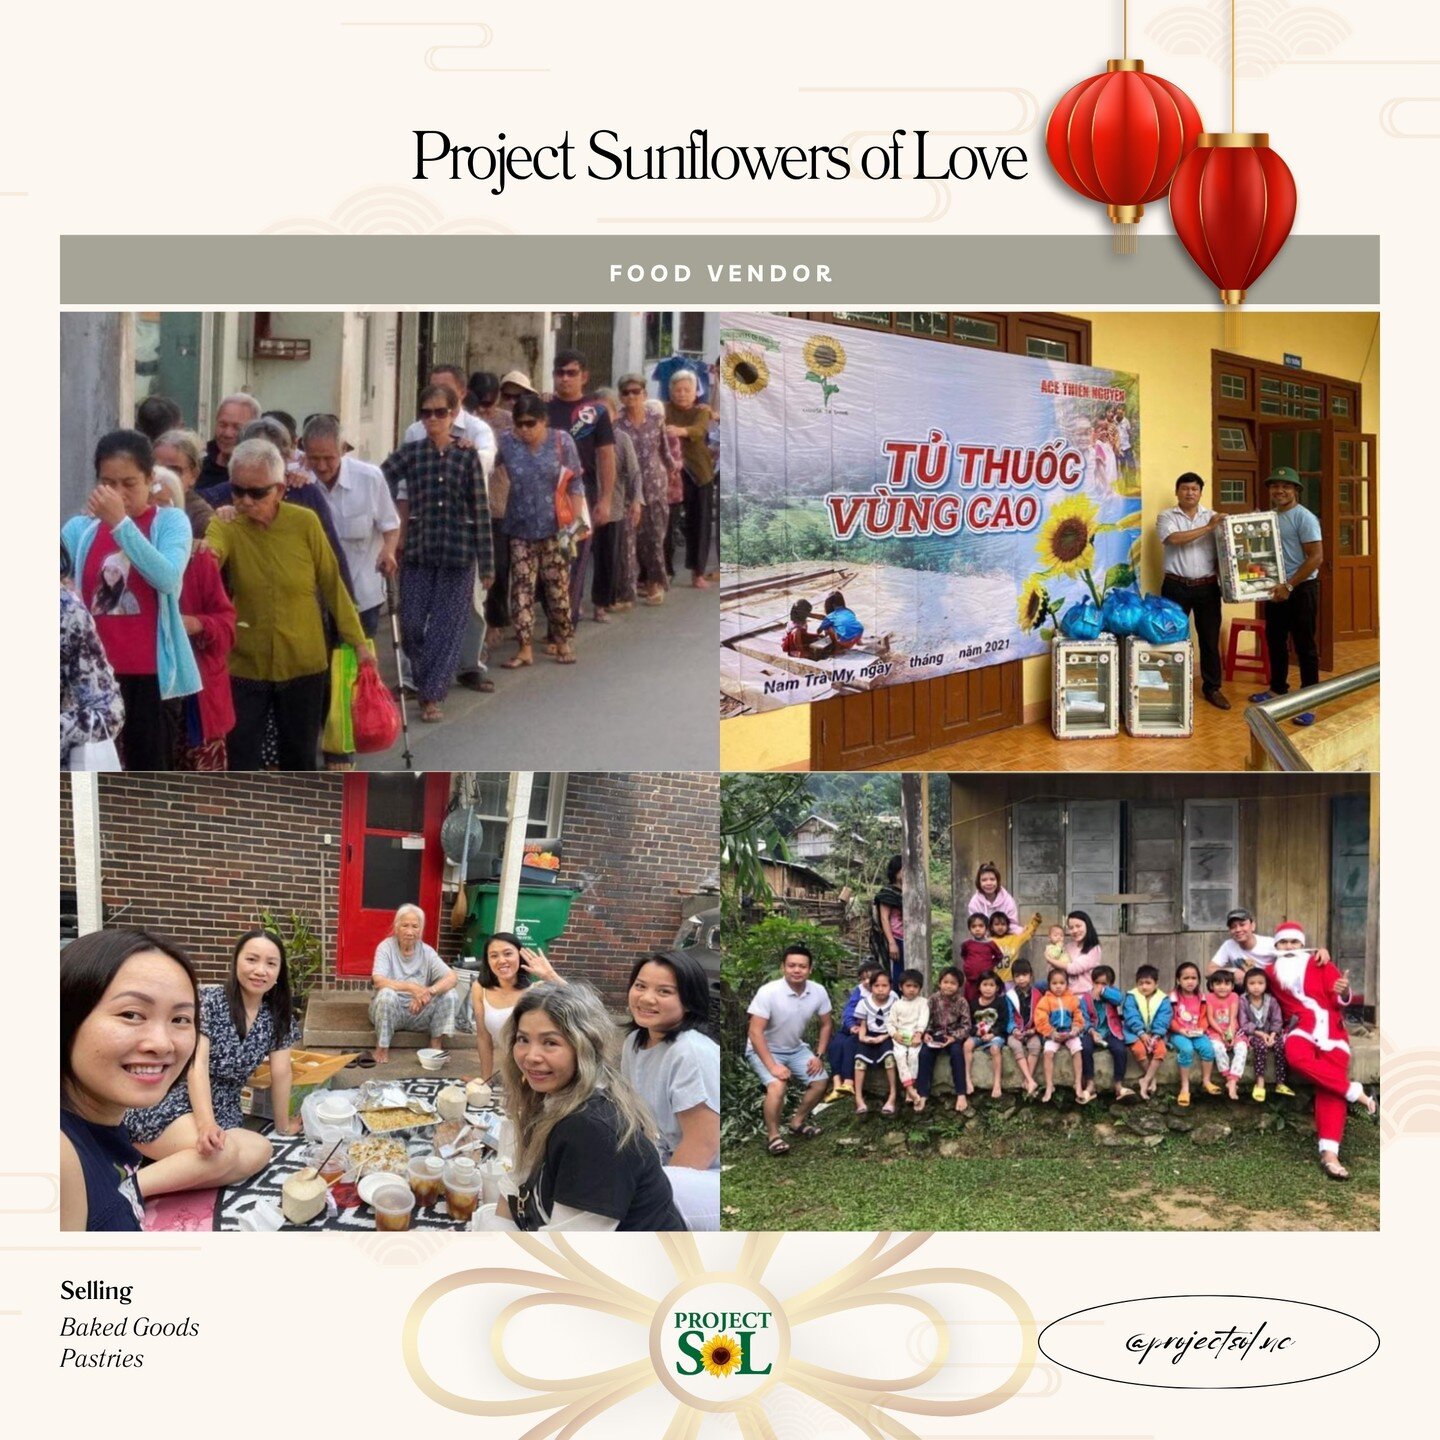 Project Sunflowers of Love is an organization that strives to promote the welfare and livelihood of the sick and underserved groups in Charlotte and SE Asia. They do this through hosting different fundraisers throughout the year. They'll be selling b